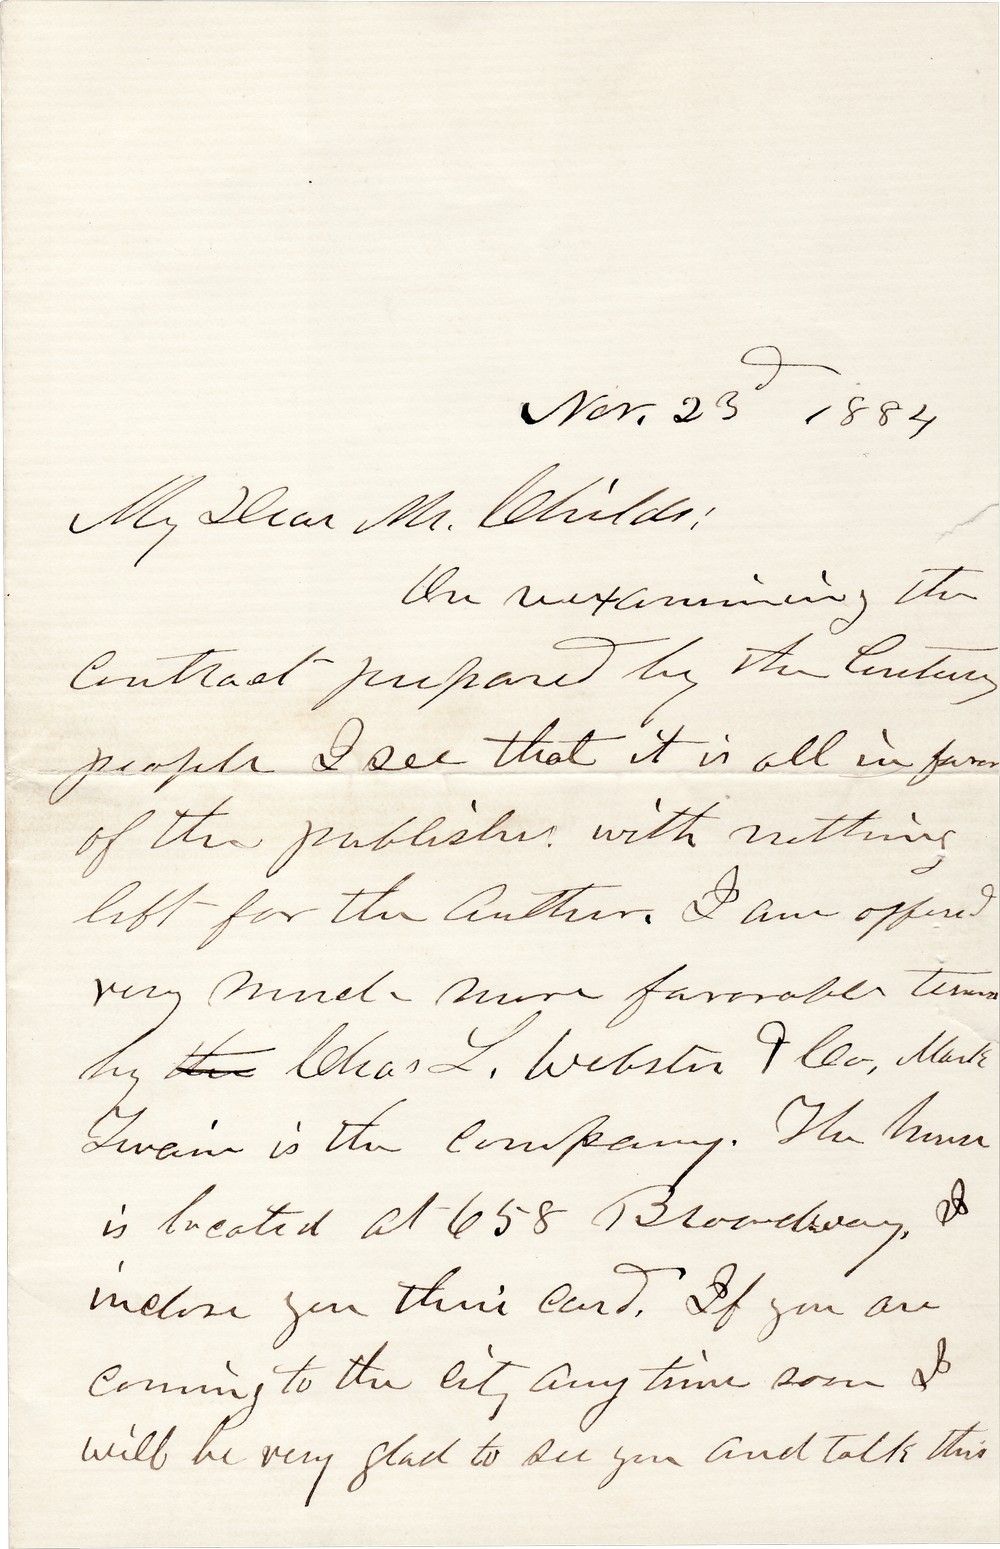 Ulysses S. Grant Says Mark Twain Has Offered Him "More Favorable Terms" To Publish His Memoirs